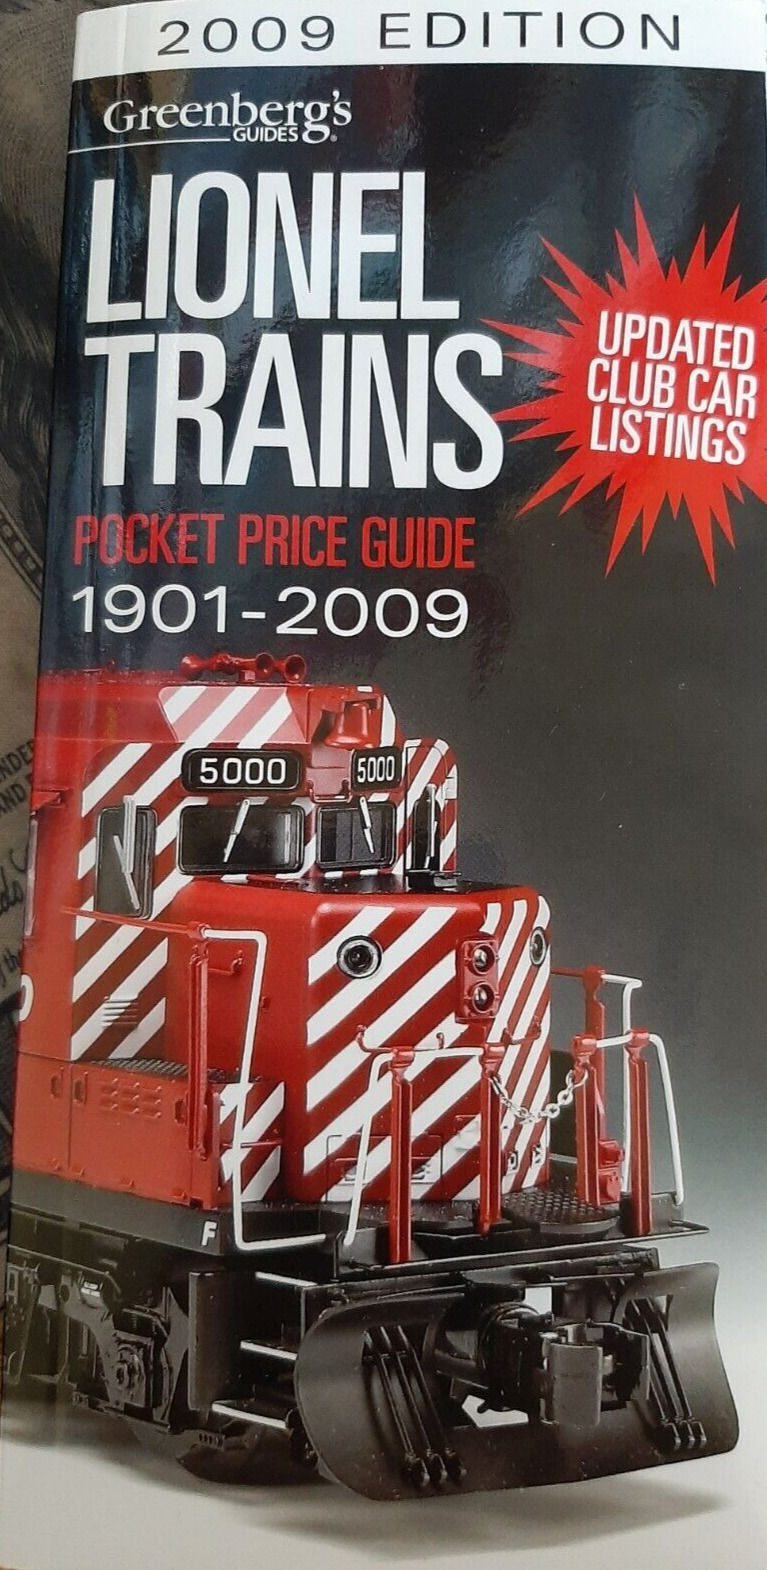 Greenberg's 2009 Edition Lionel Trains Pocket Guide 1901-2009 Updated Listings